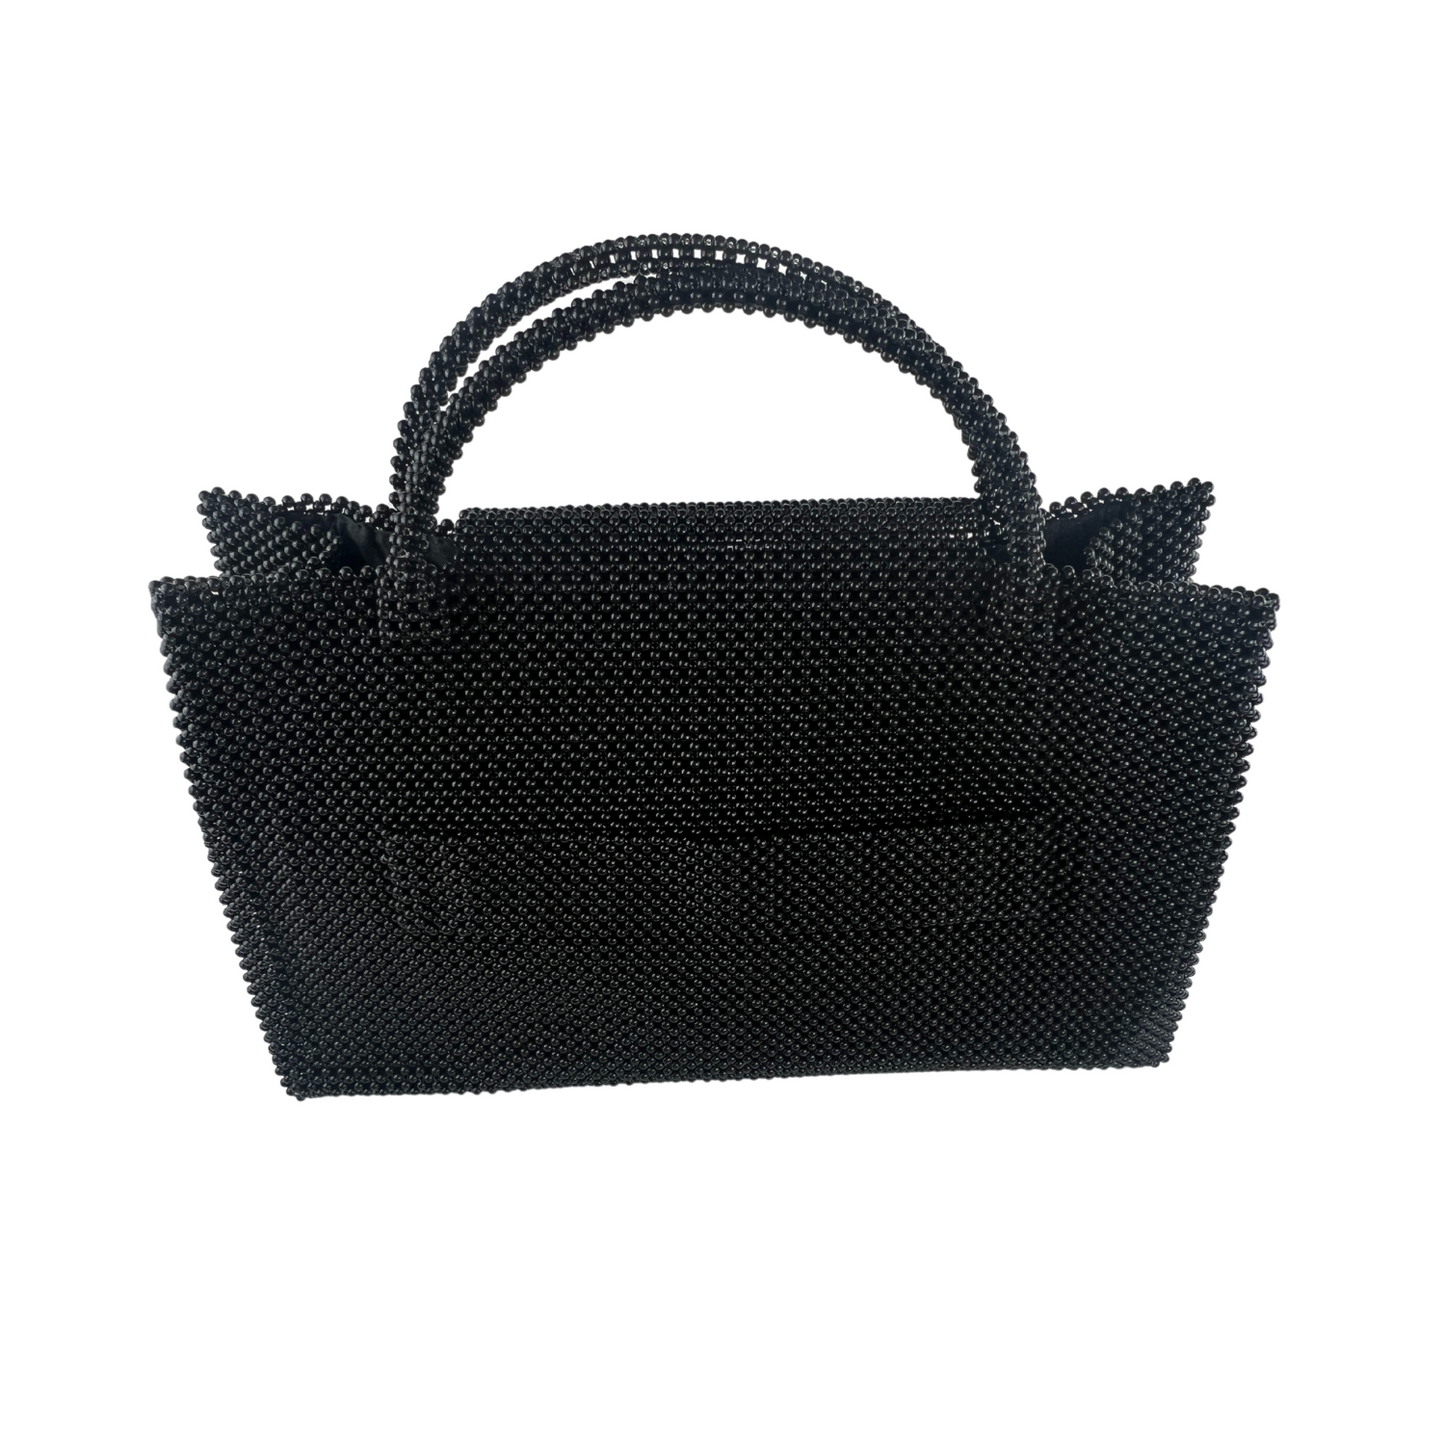 VALENCIA KEY AMBITION X-Large Structured Tote - Black